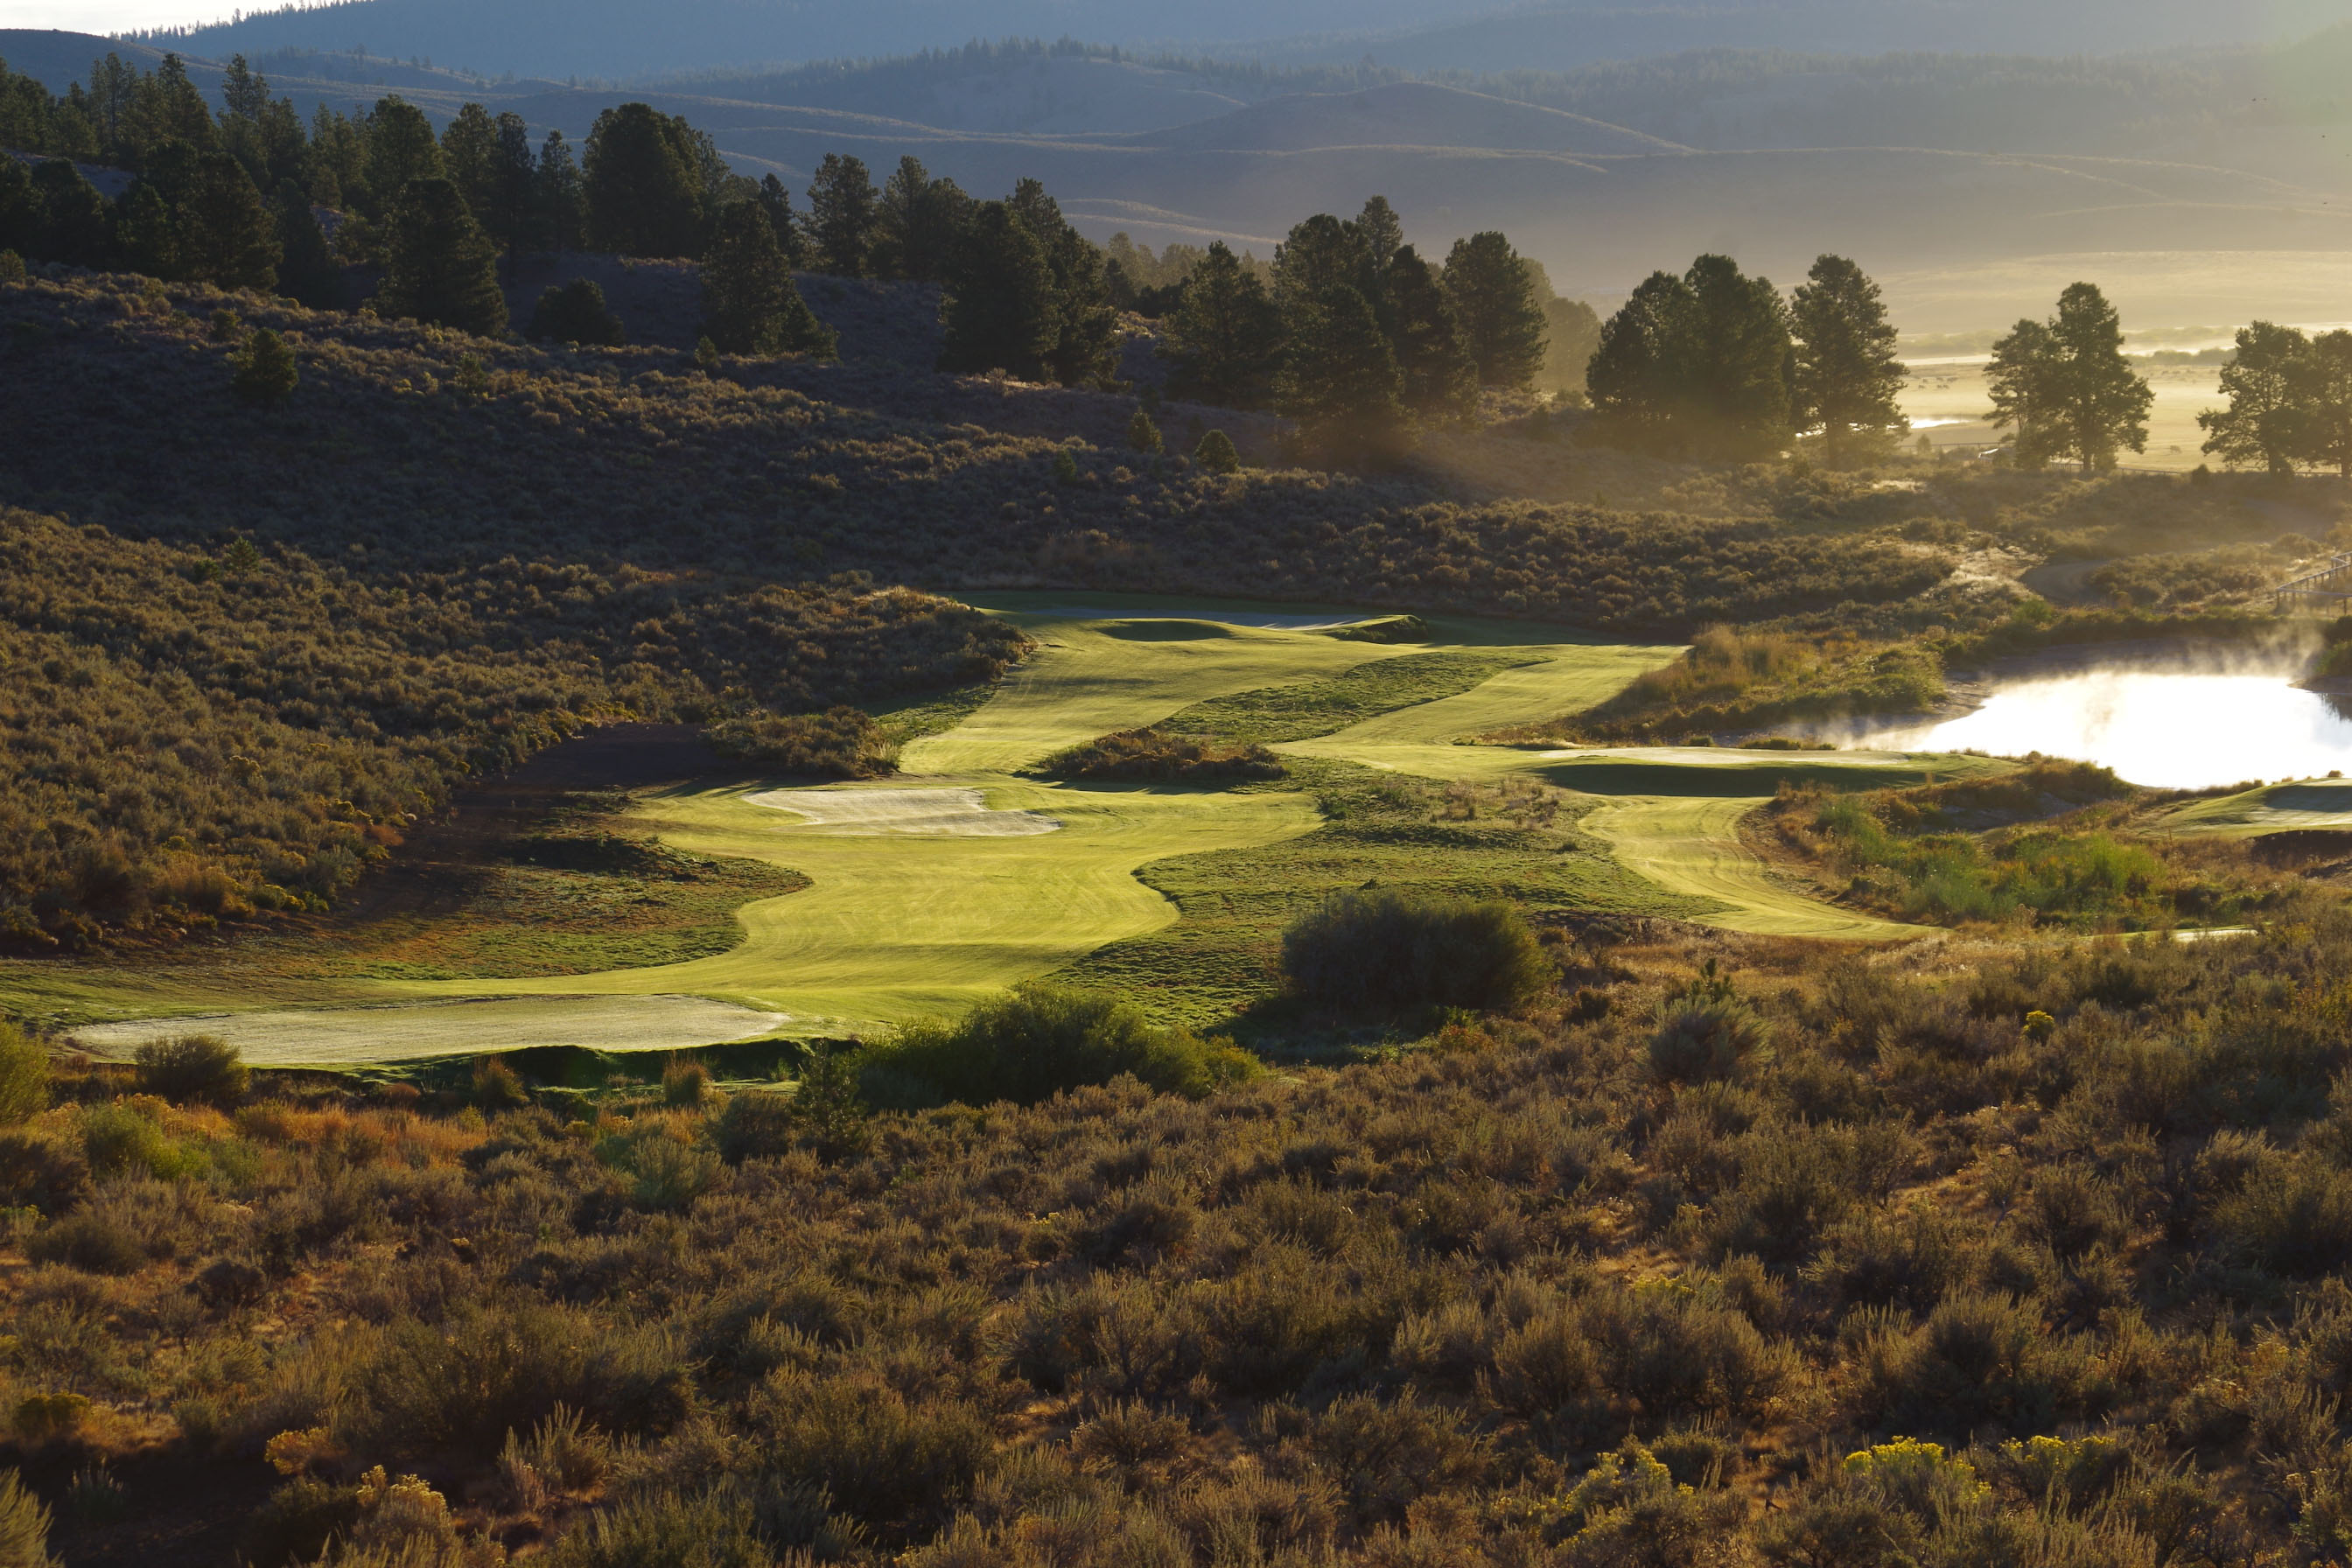 Oregon resort unveiling two reversible 18-hole golf courses in 2017